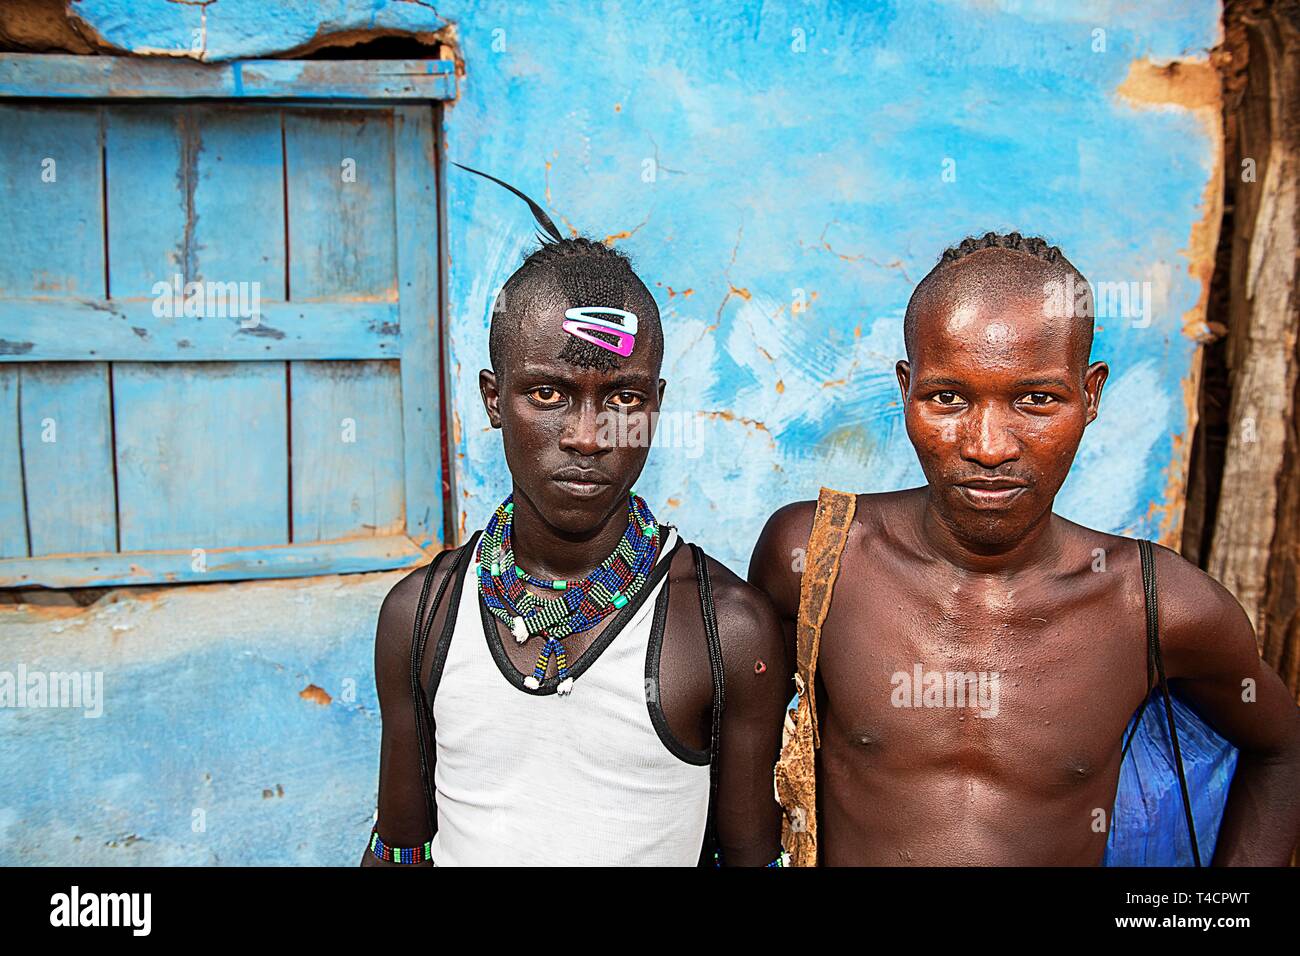 Young men of the Hamer ethnic group with colourful hair clips and pearl jewellery, Dimeka, Lower Omo Valley, Omo region, South Ethiopia, Ethiopia Stock Photo